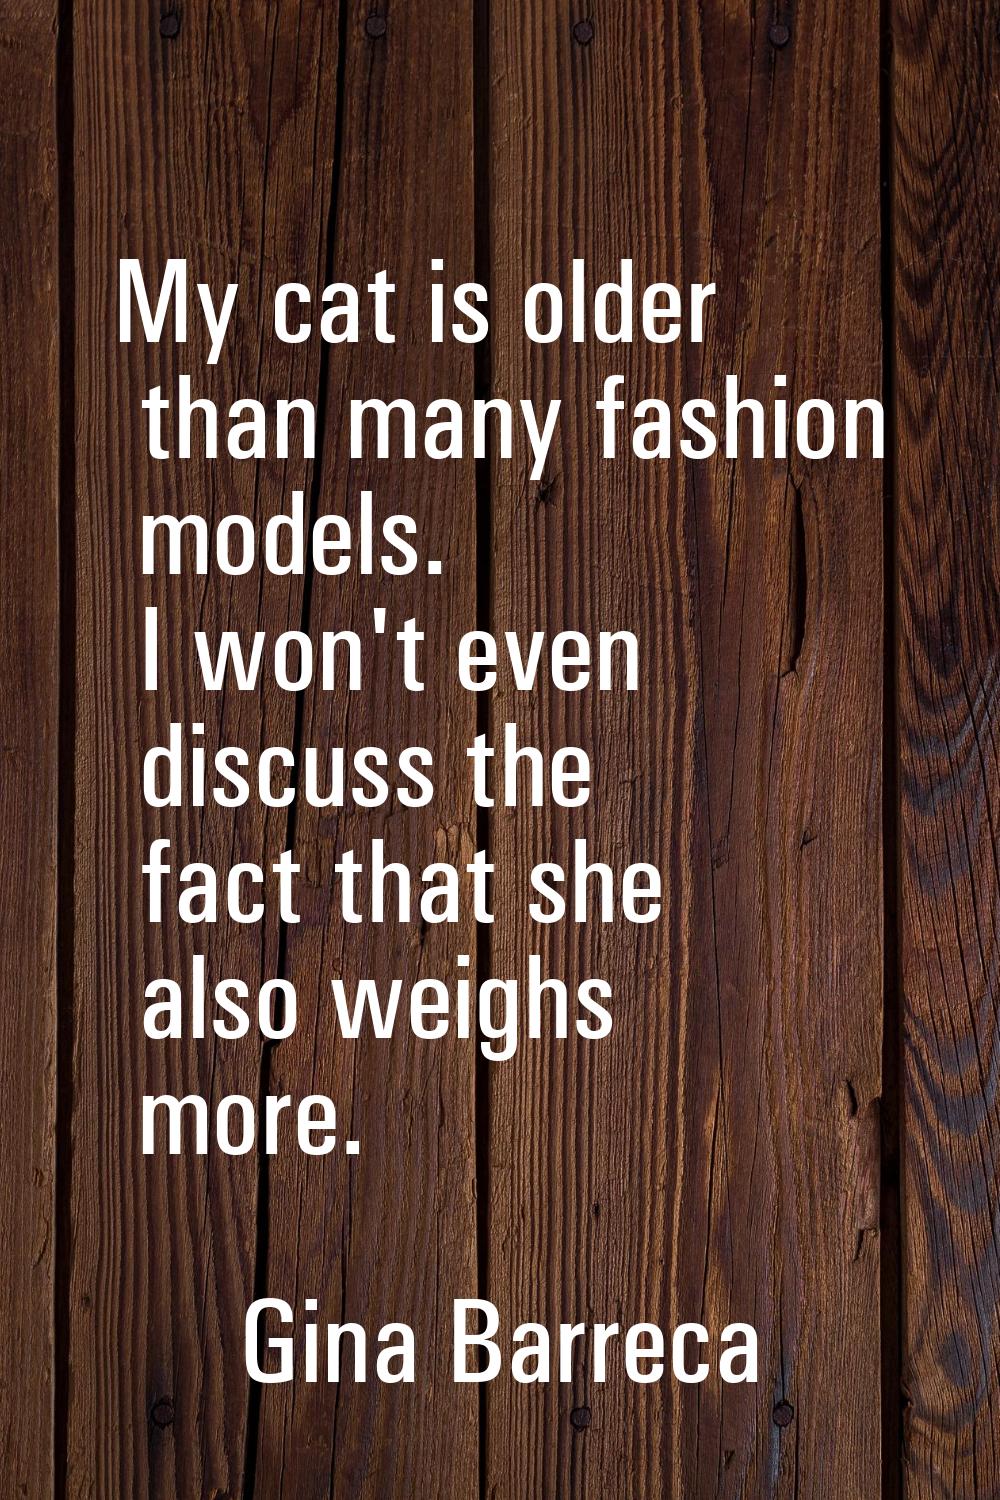 My cat is older than many fashion models. I won't even discuss the fact that she also weighs more.